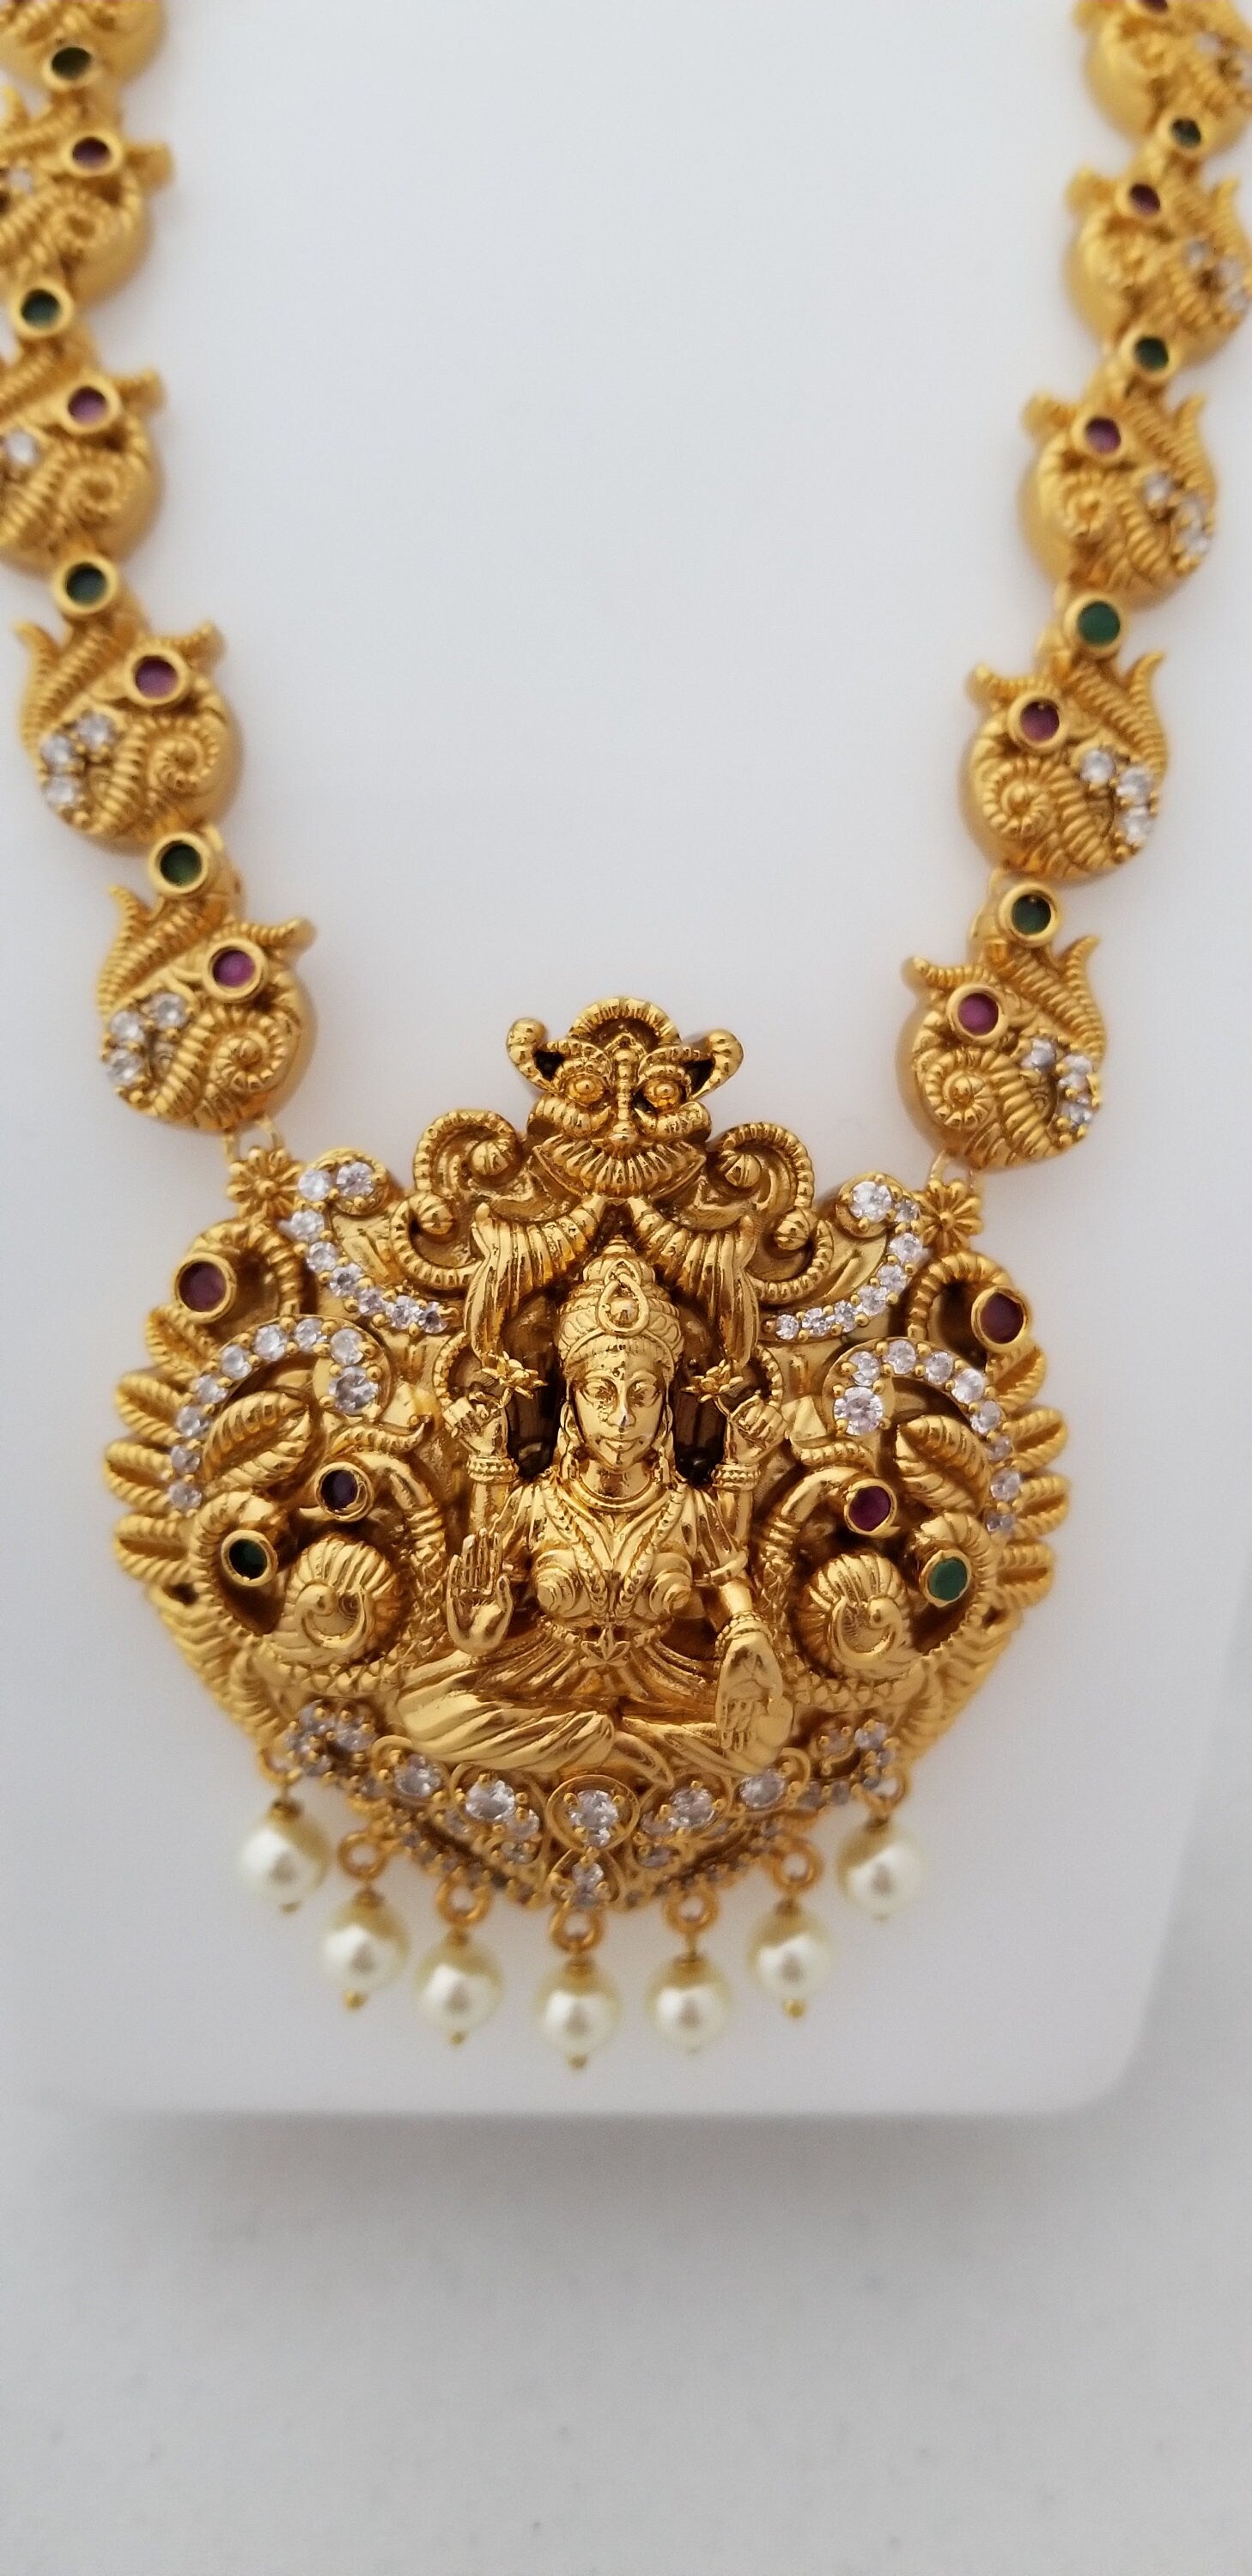 Premium Quality Lakshmi matte finish middle Haram with Beautiful Earrings - Temple Jewelry